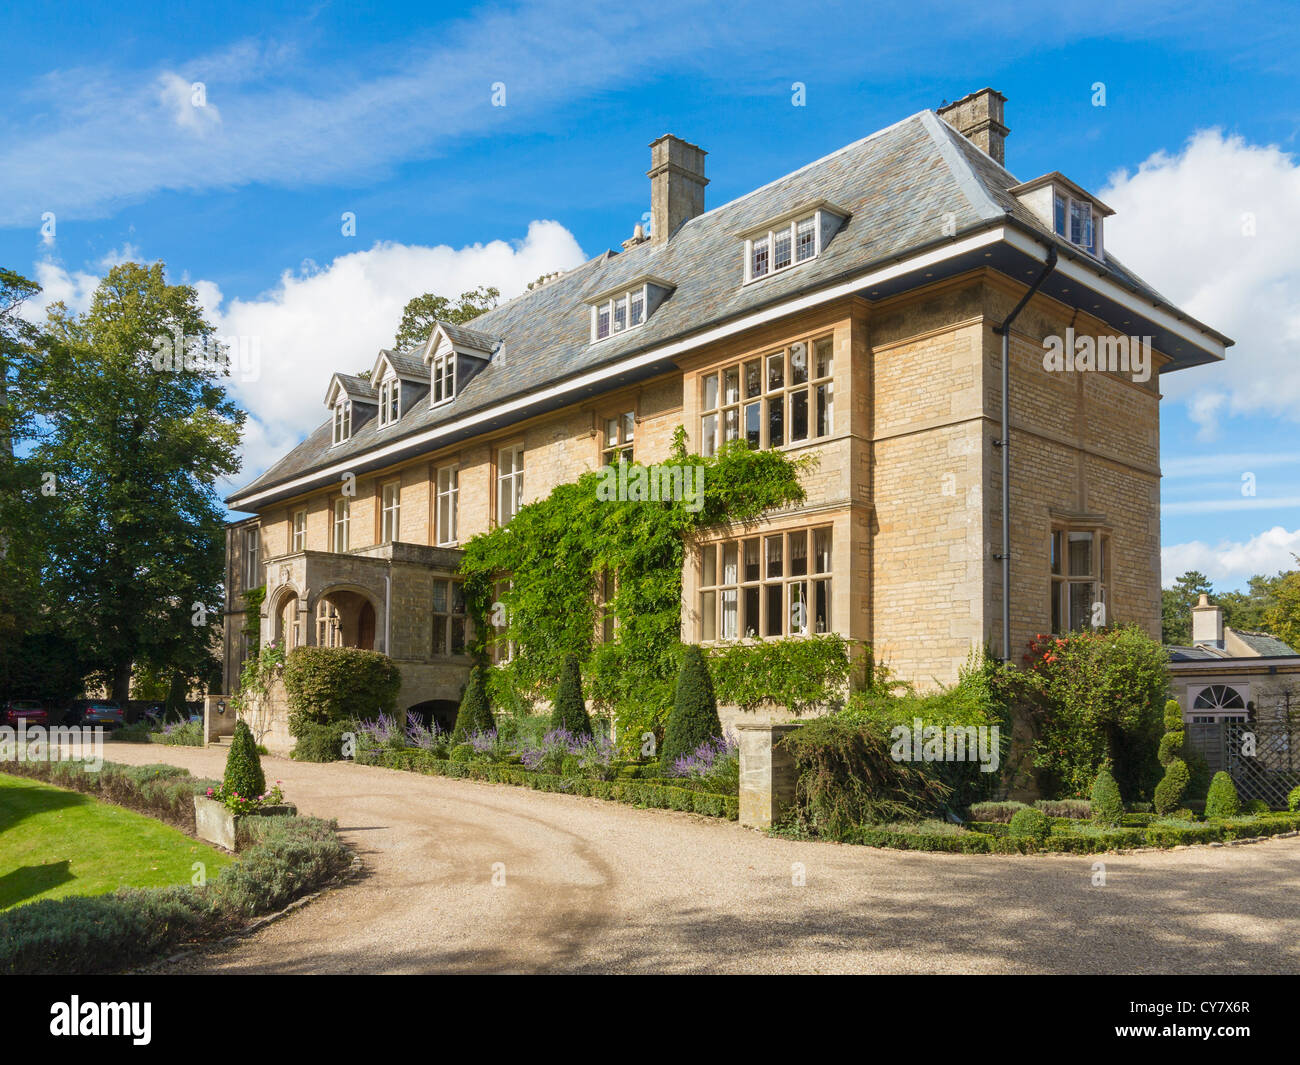 Lower Slaughter Manor, Lower Slaughter in Cotswolds, England, Regno Unito Foto Stock